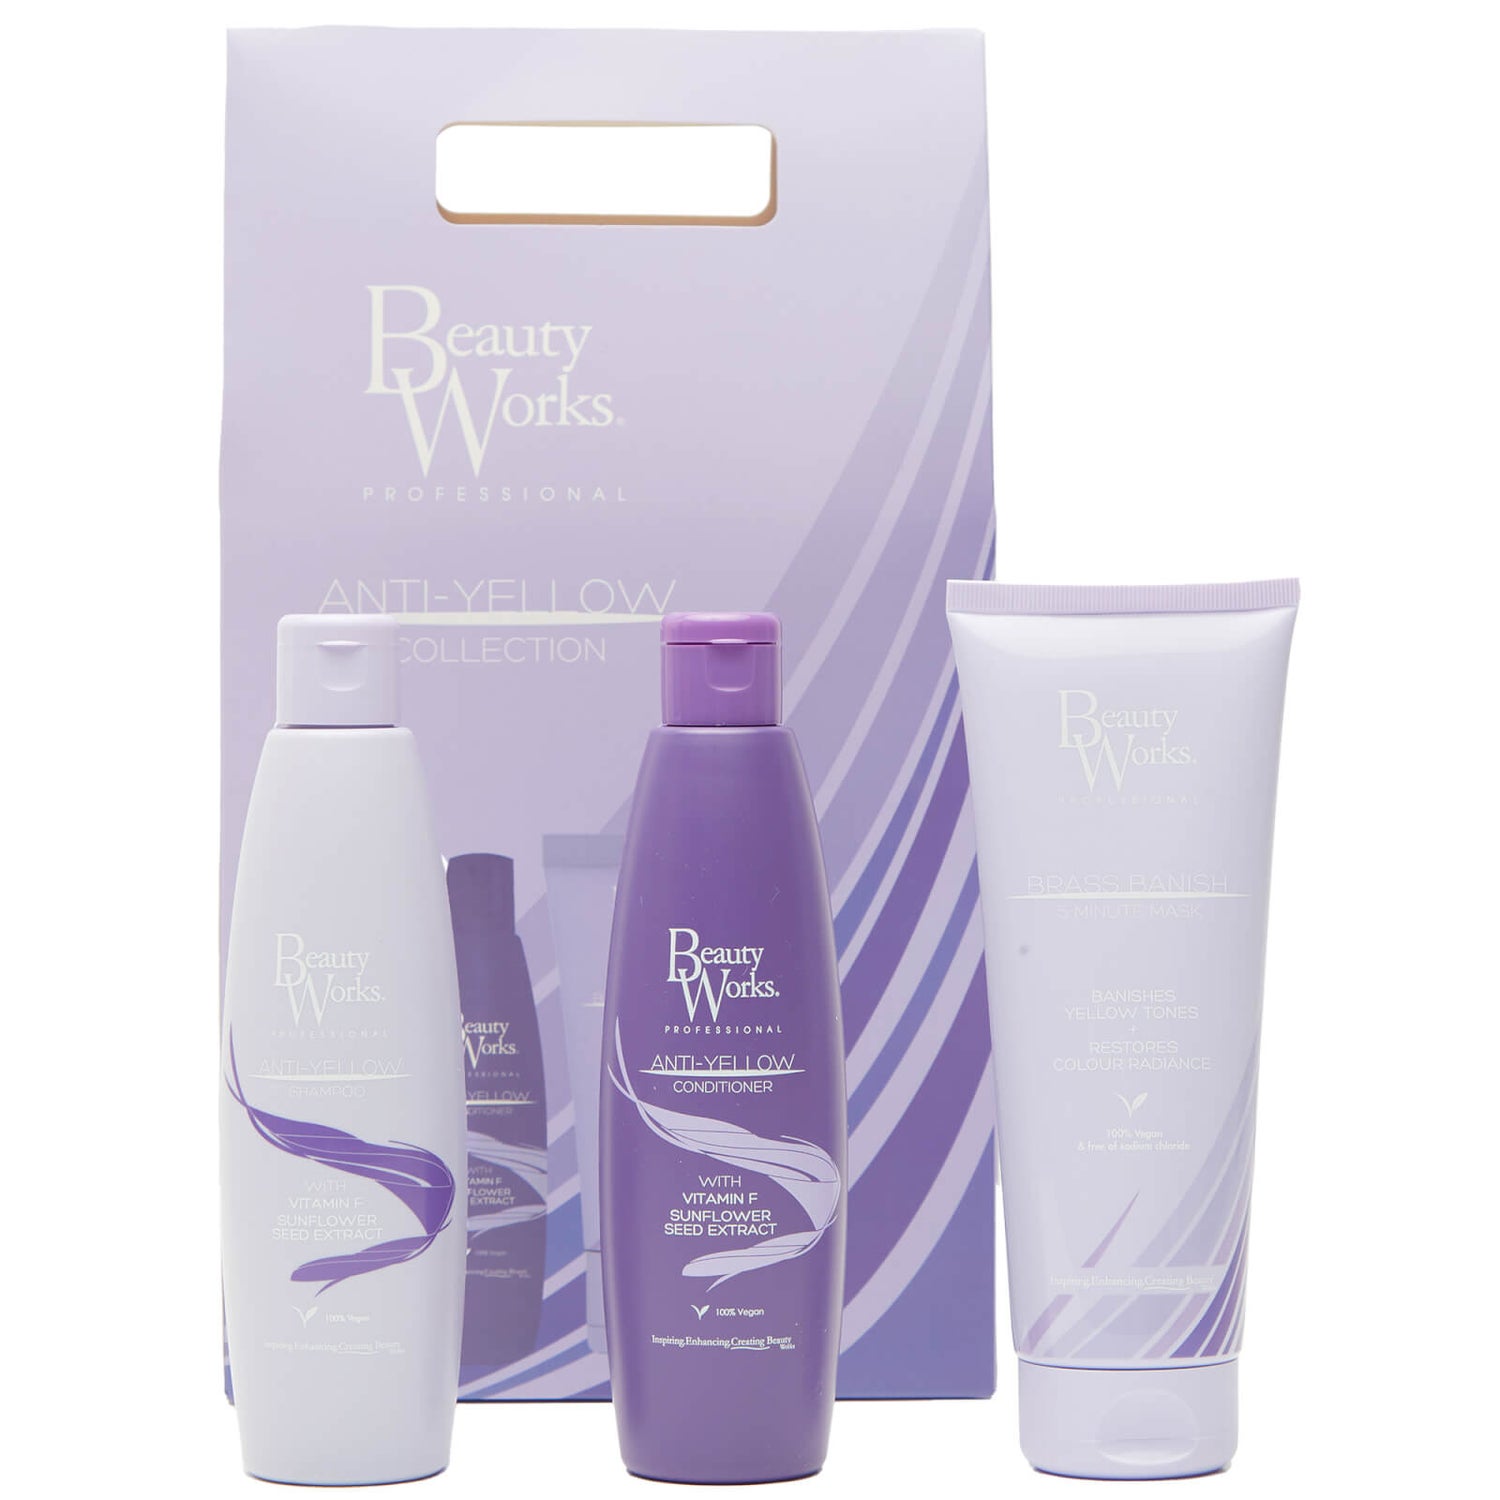 Beauty Works Anti Yellow Collection Gift Set (Worth £39.97)